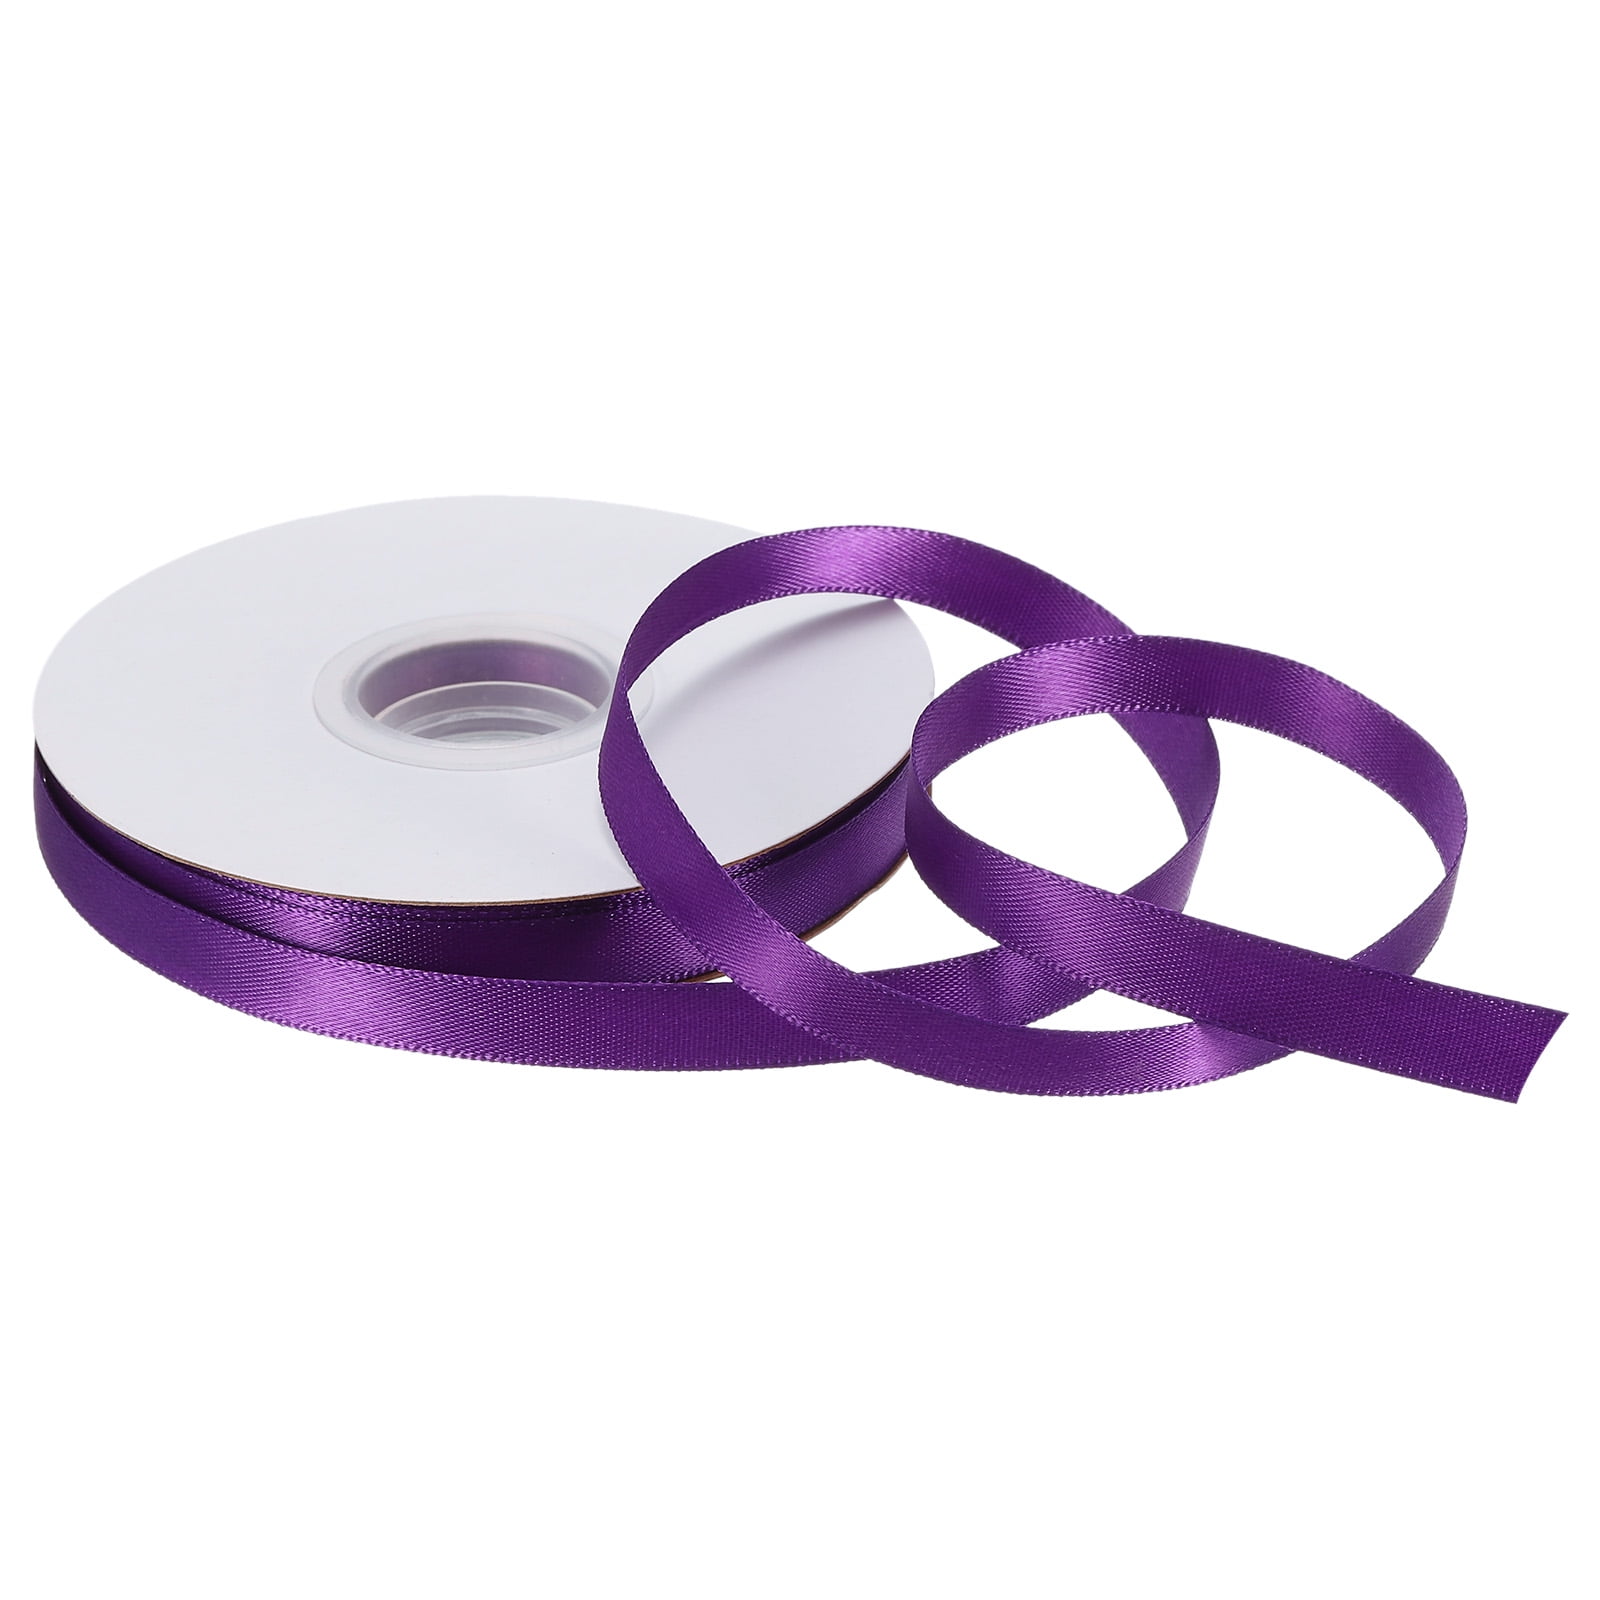 ATRibbons 25 Yards 1-1/2 inch Wide Satin Ribbon Perfect for Weddinghandmade Bows and Gift Wrapping (Purple)